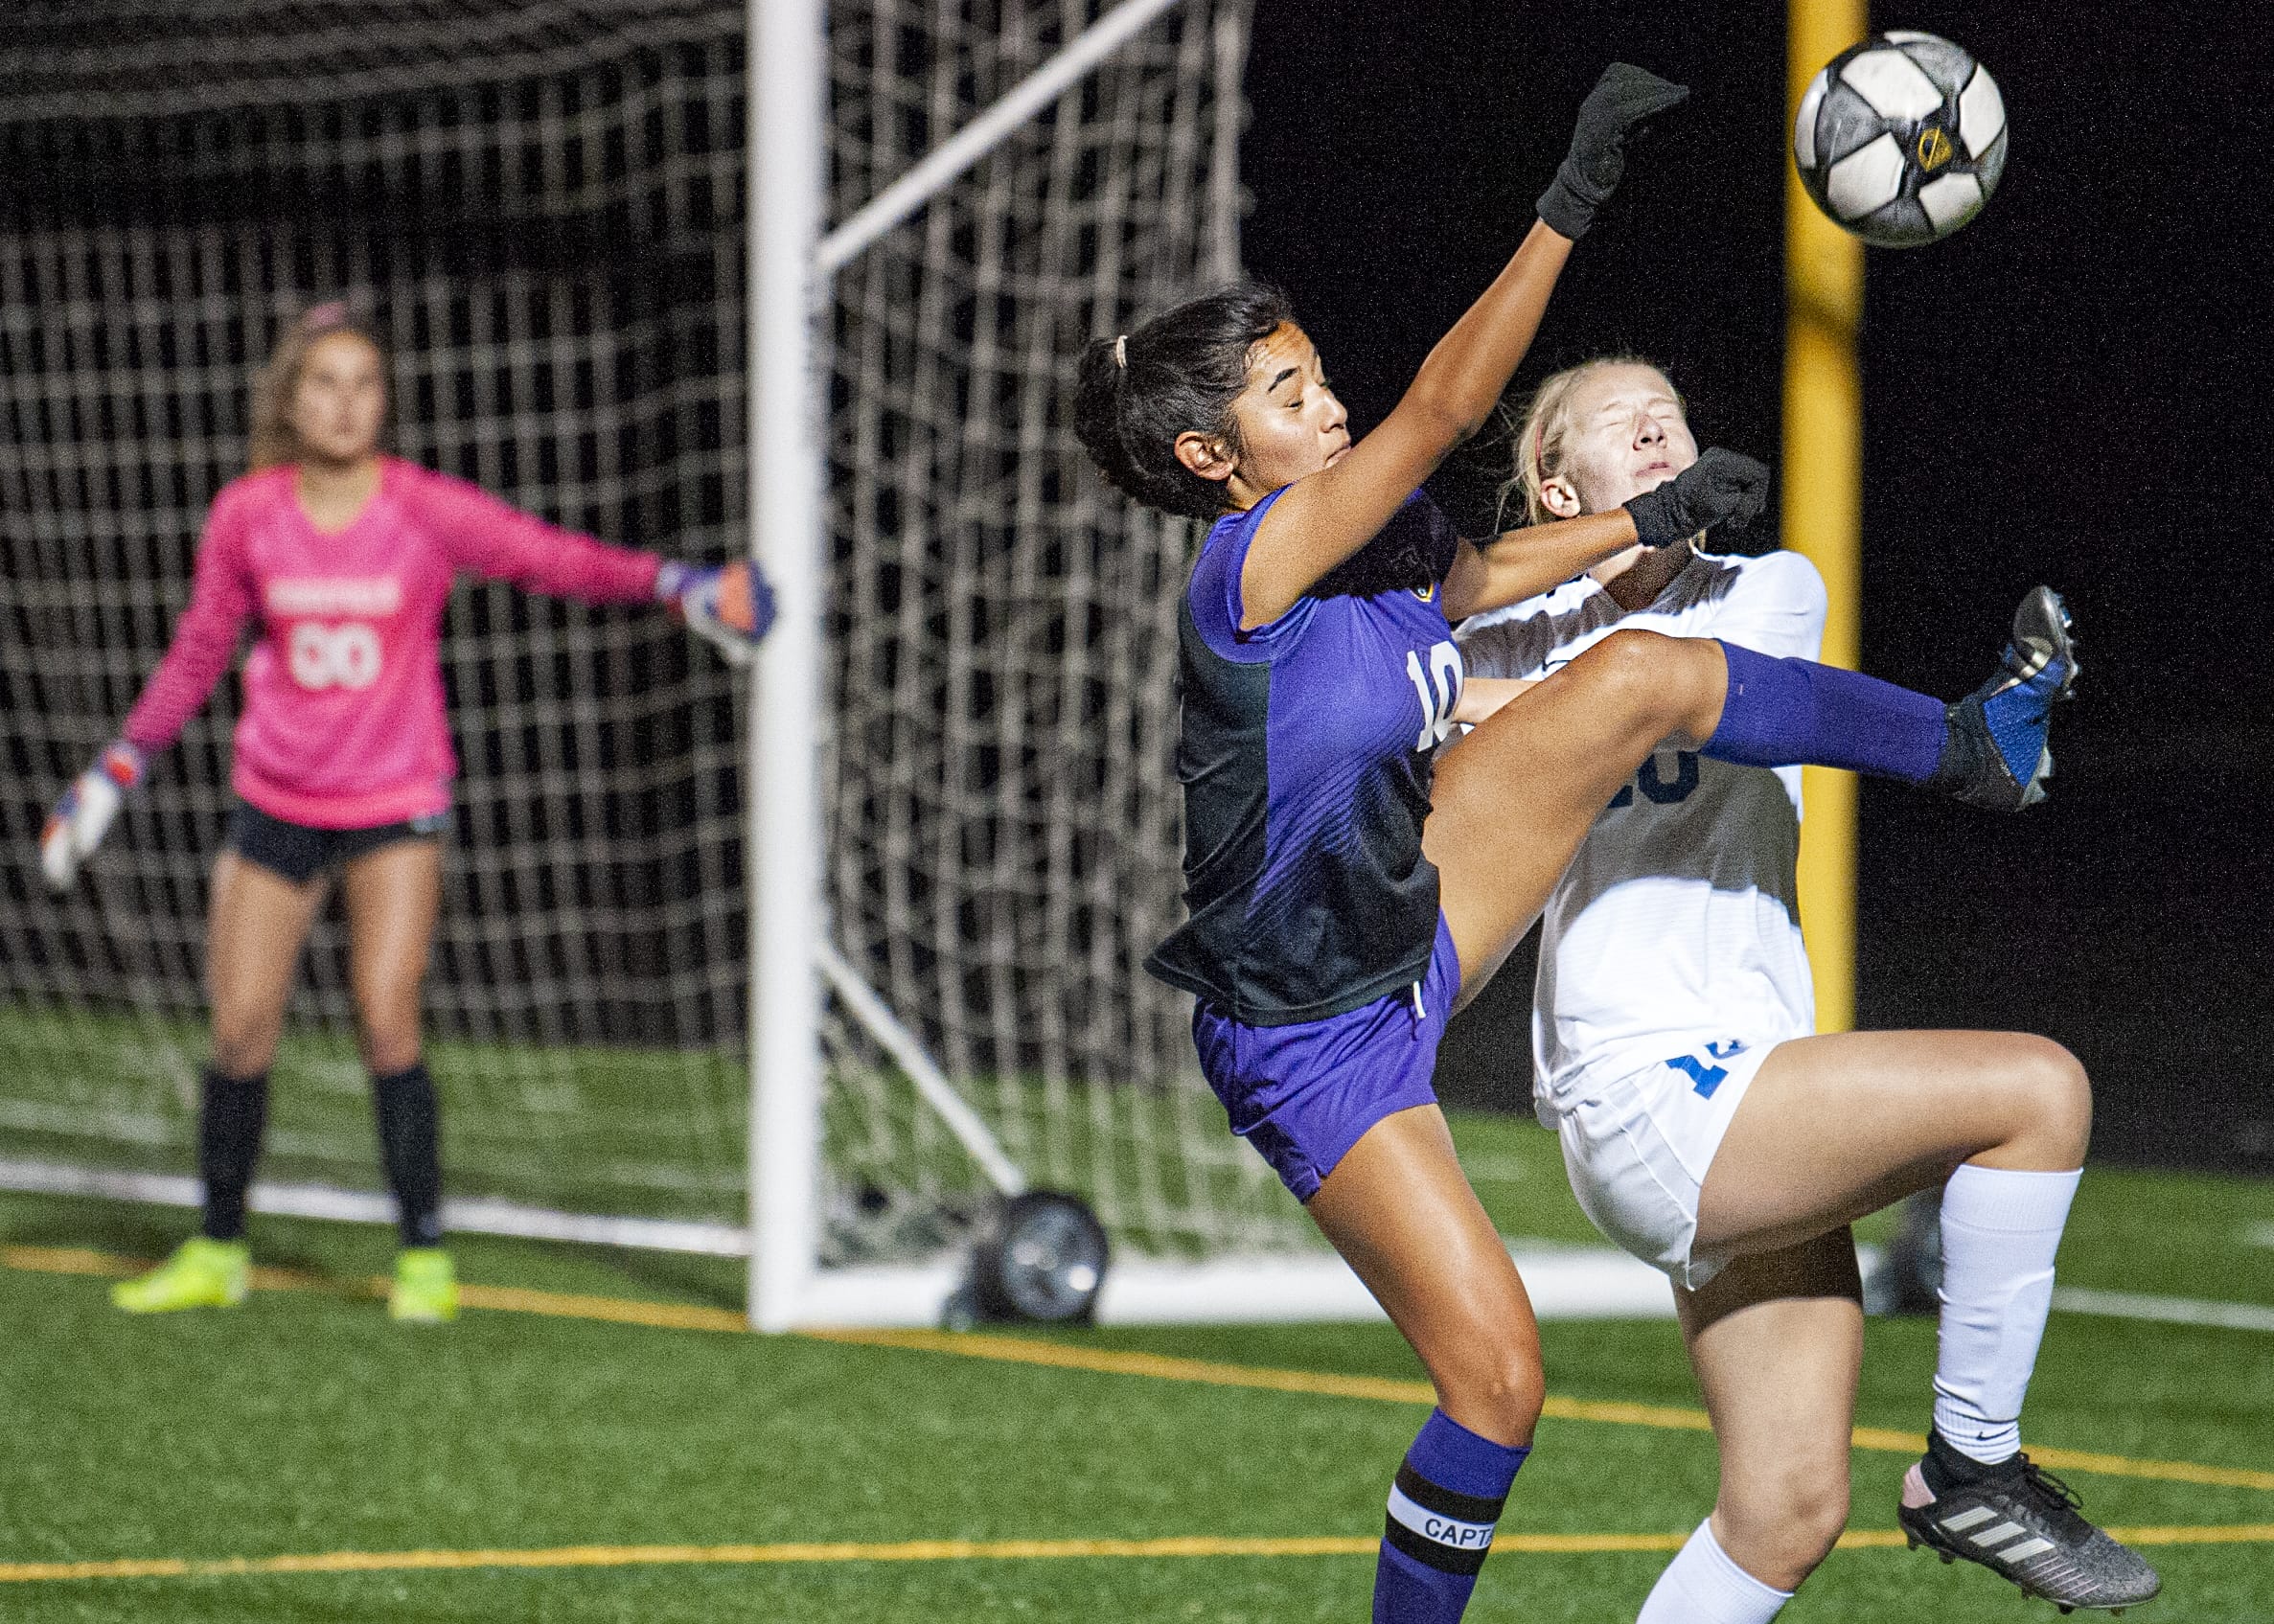 Columbia River’s Yaneisy Rodriguez, front, tries to win a ball against Ridgefield’s Jaynie Murray in the Chieftains’ 2-1 win on Tuesday at Chieftain Stadium.